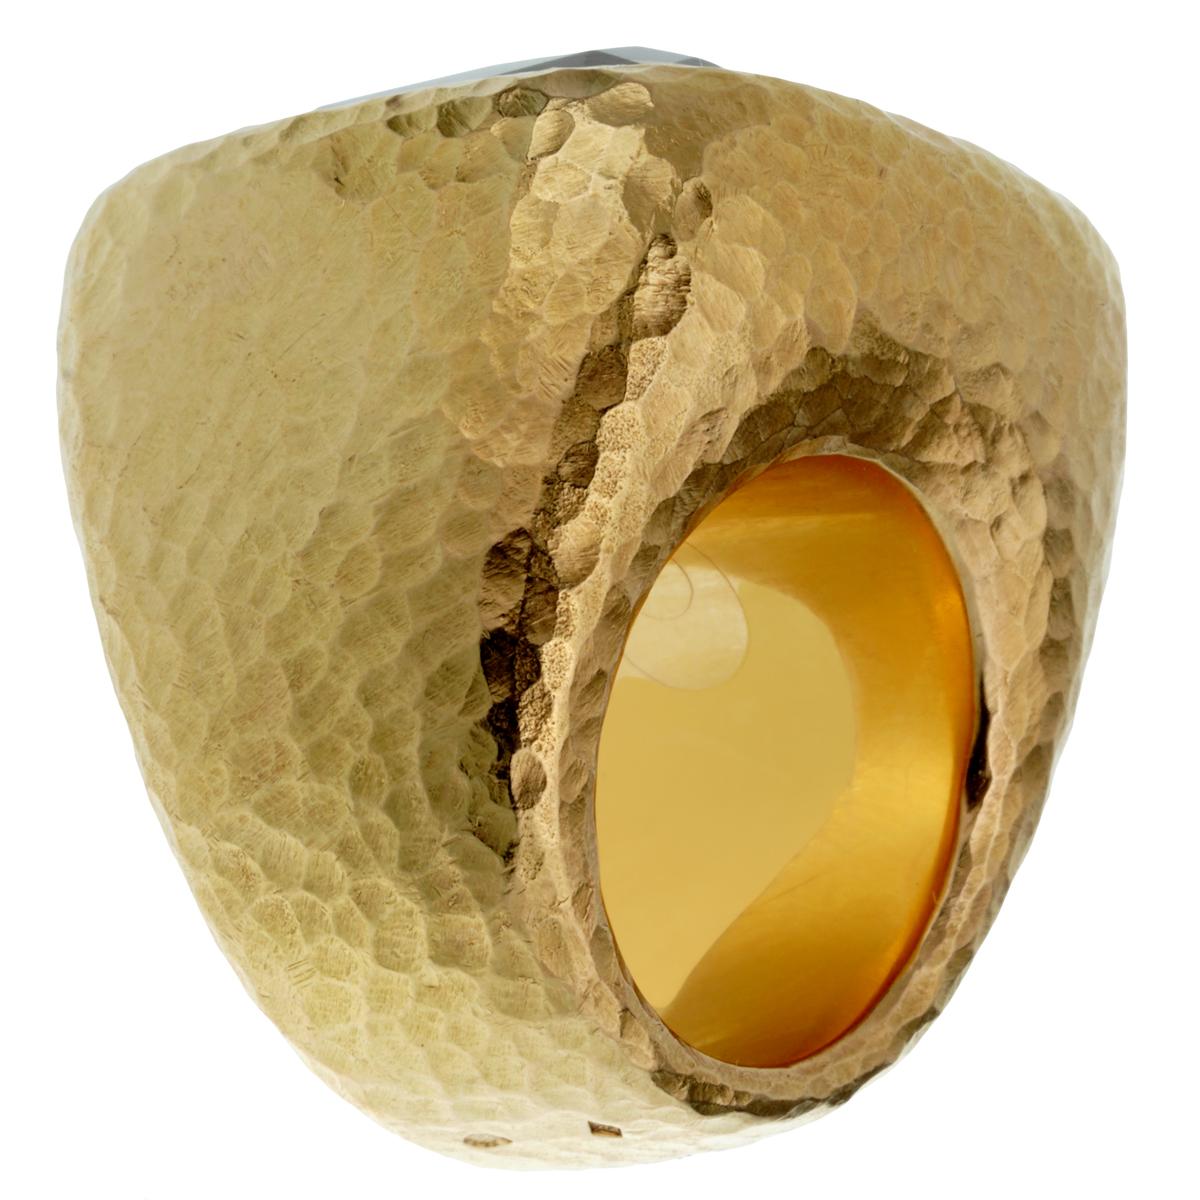 A showstopping Christian Dior cocktail ring for sale showcasing a massive 25ct appx Citrine in a hammered 18k yellow gold mounting. The ring measures a size 6 1/4